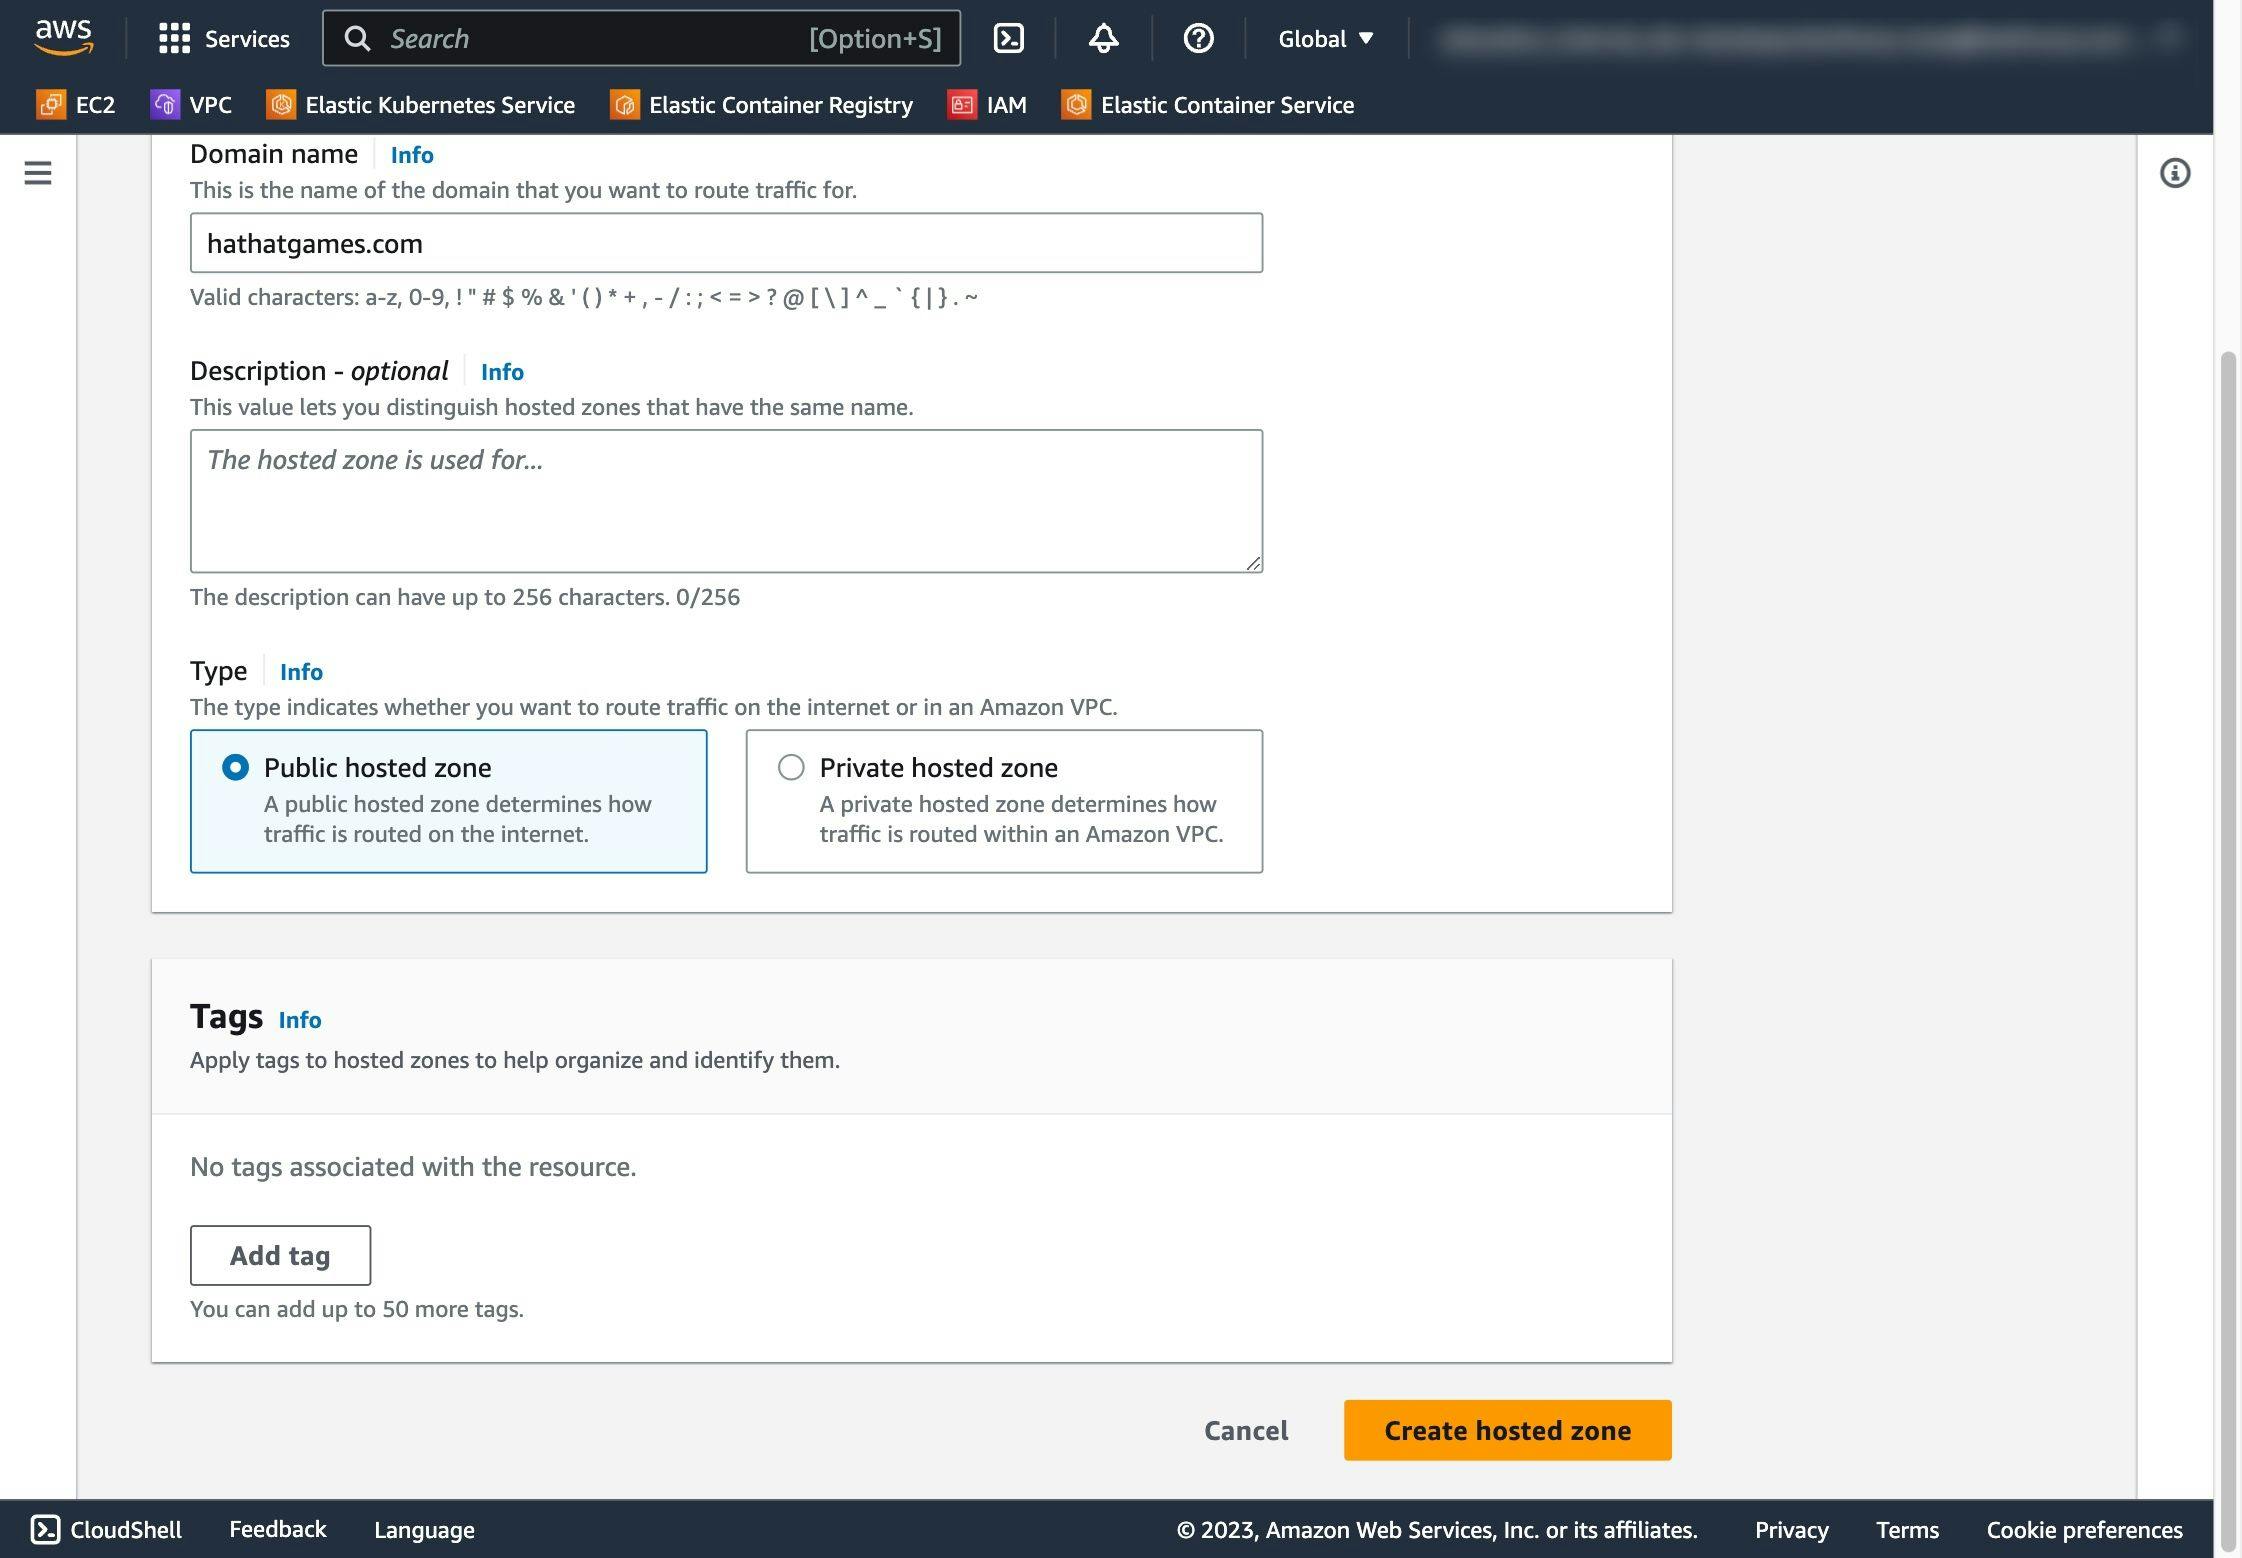 AWS console page showing the form for the creation of a hosted zone